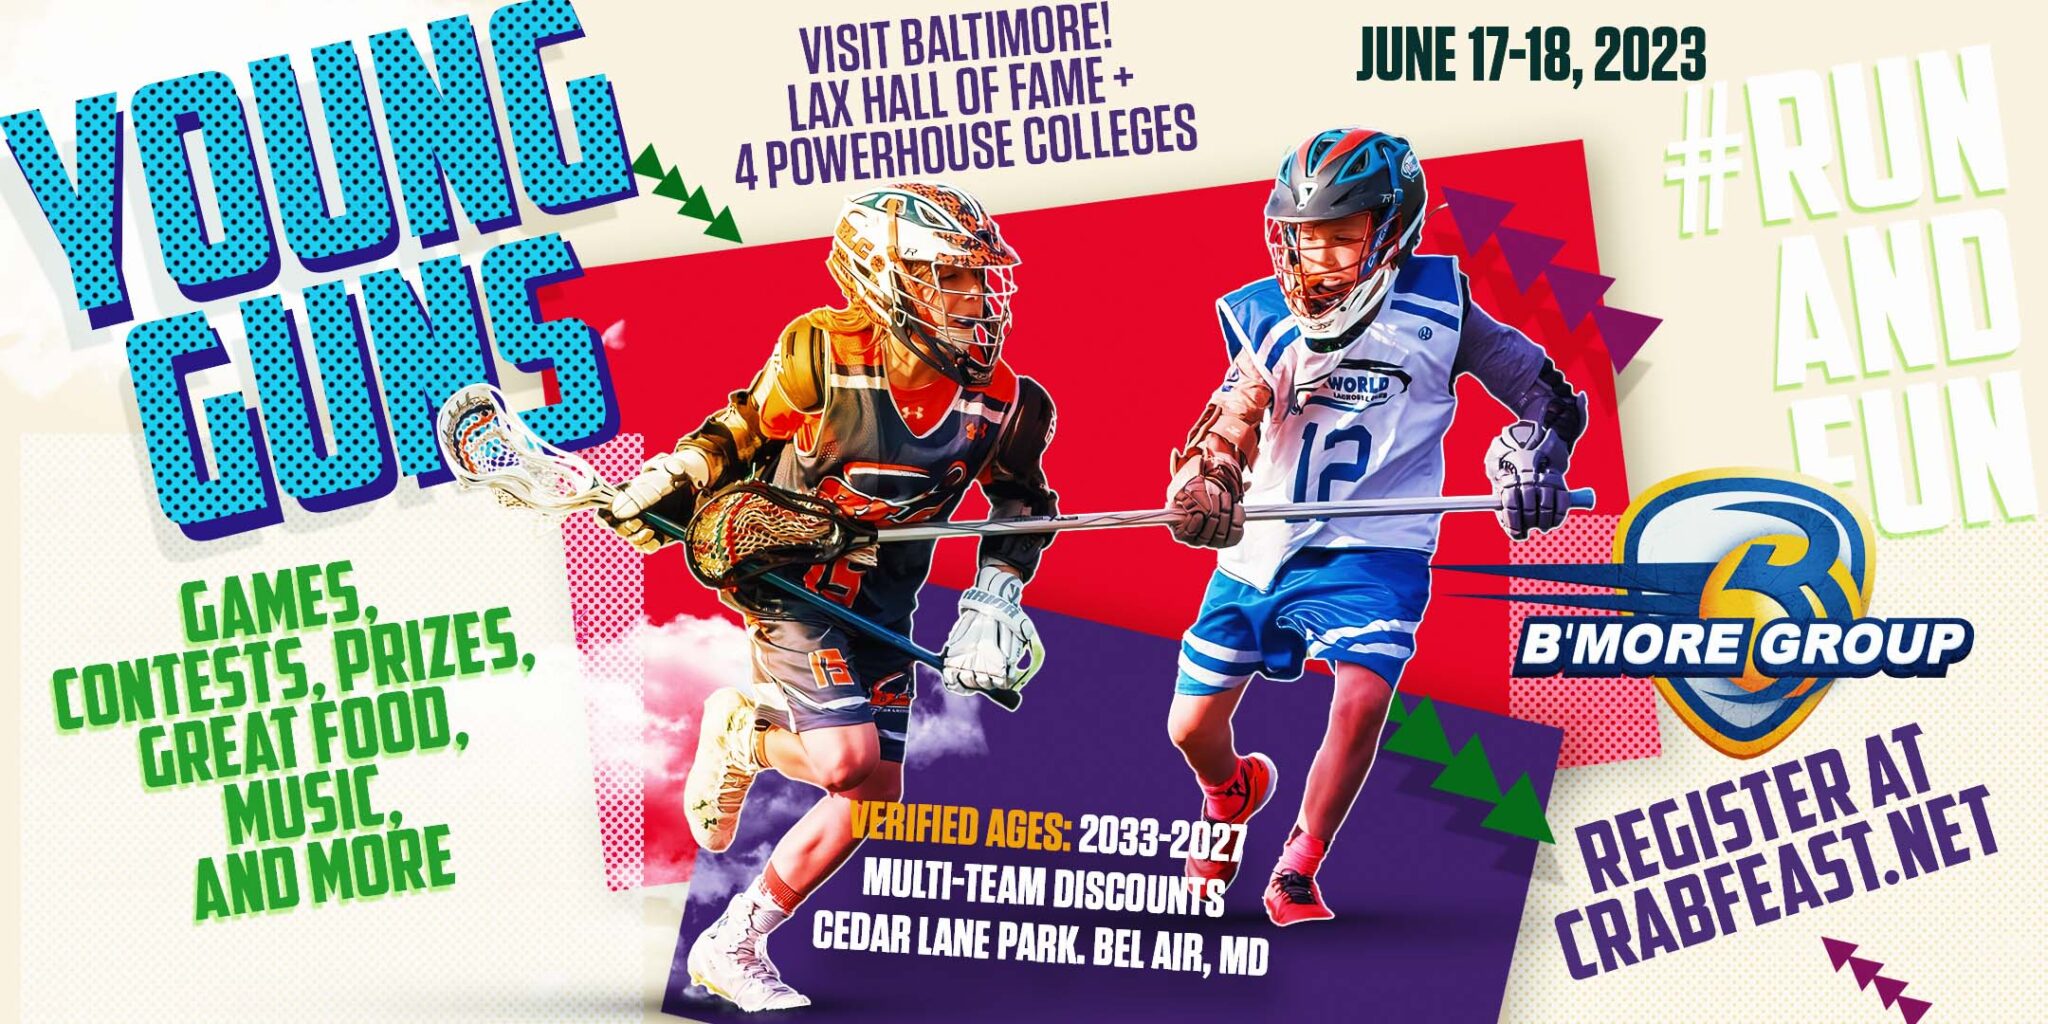 Crabfeast National Lacrosse Recruiting Tournament in Baltimore, Maryland